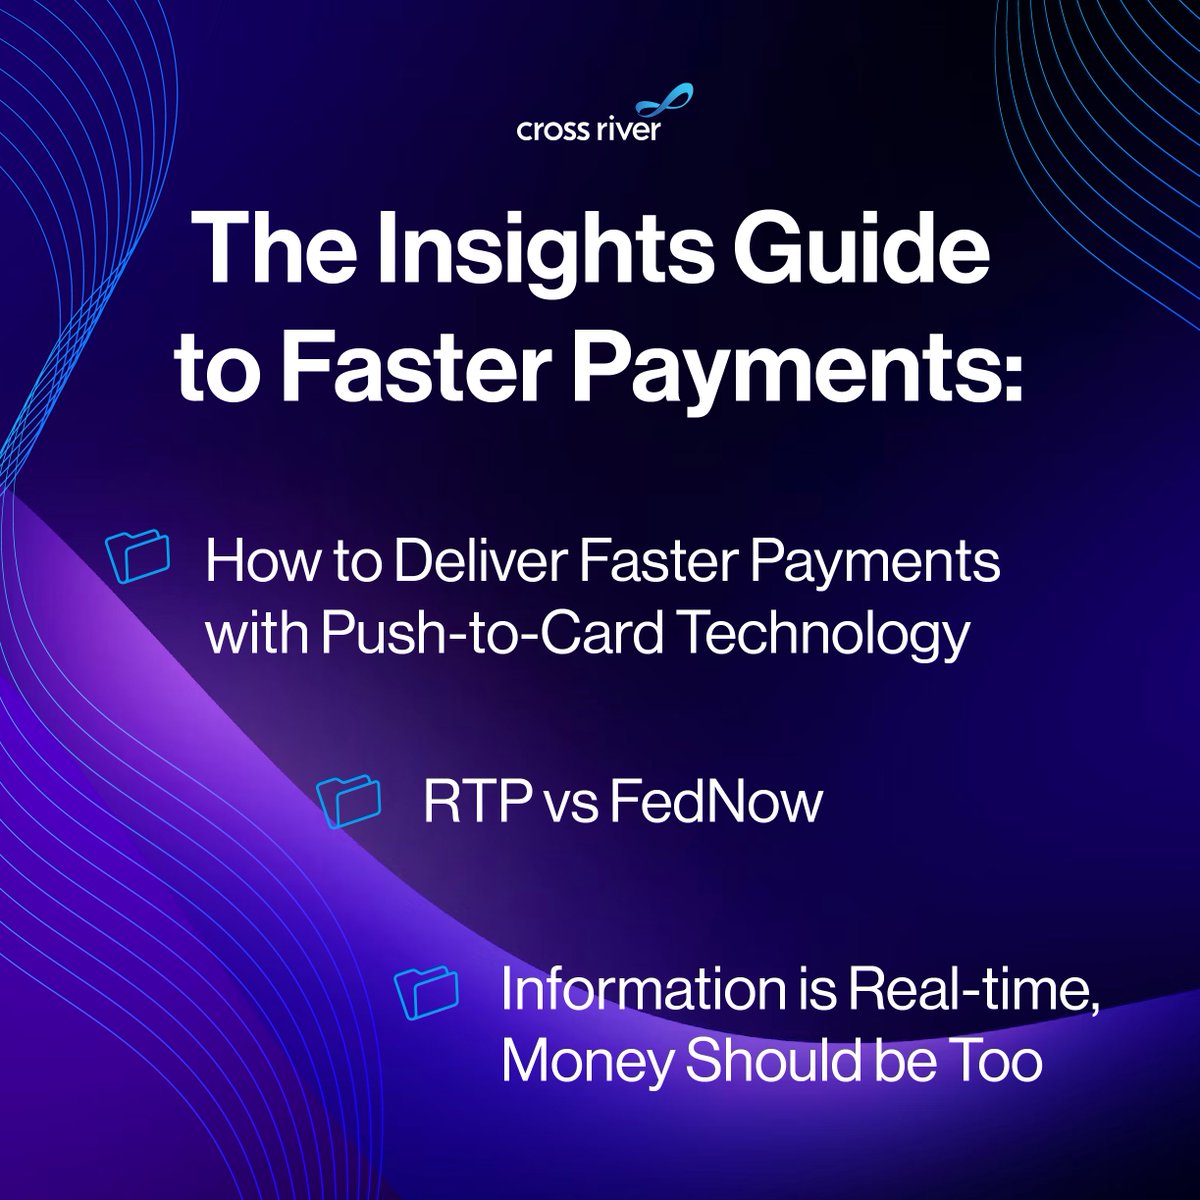 Stay in the fast lane of payments! Check out these pieces about #fasterpayments on our Insights page: crossriver.com/insights